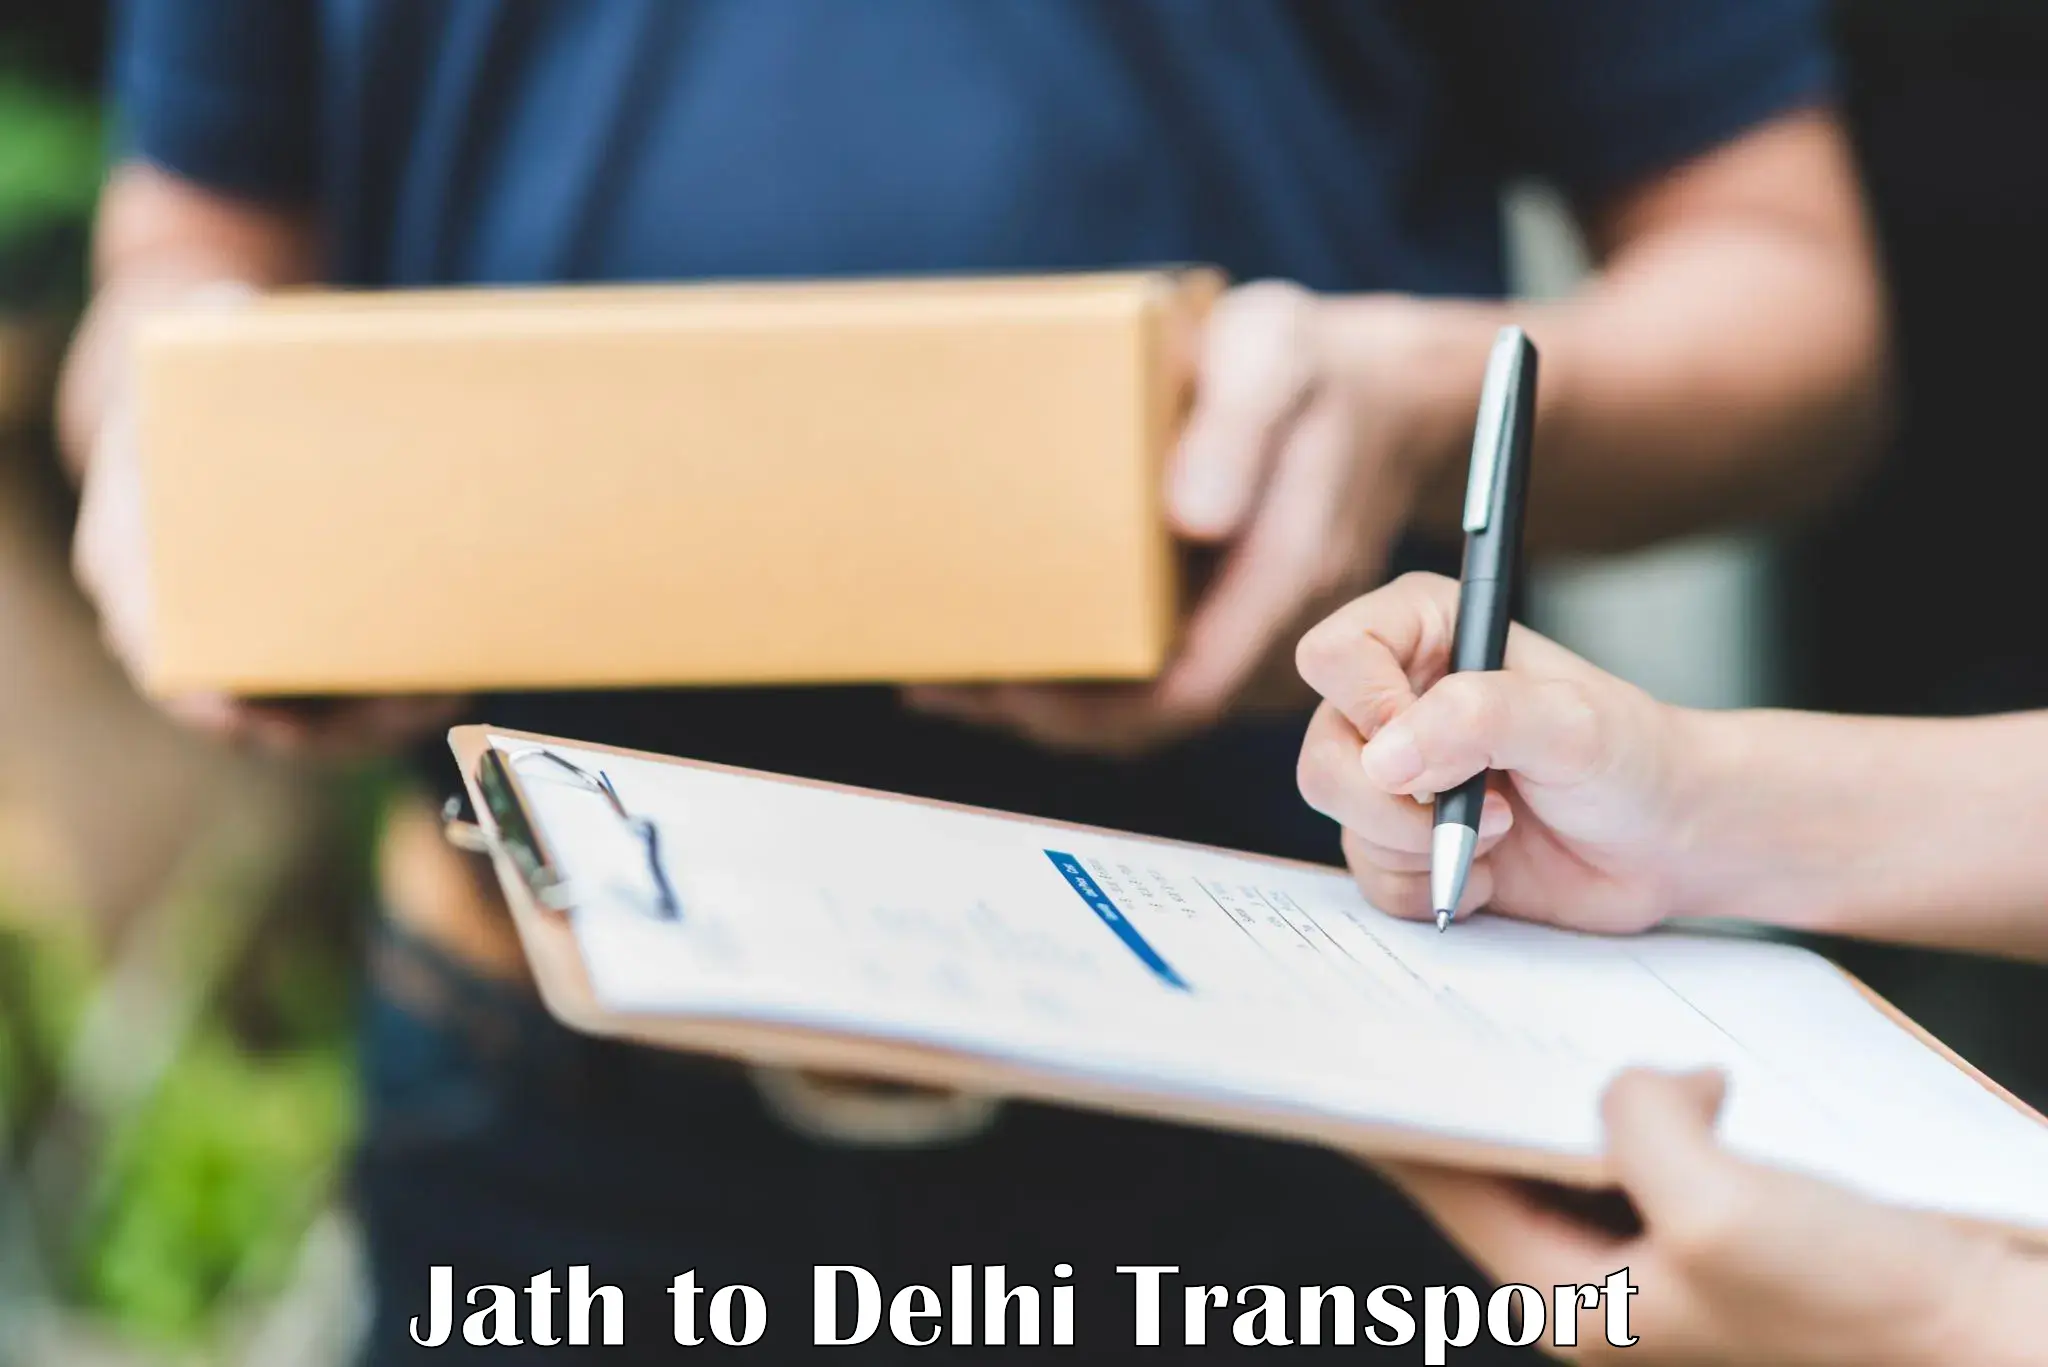 Daily parcel service transport Jath to East Delhi